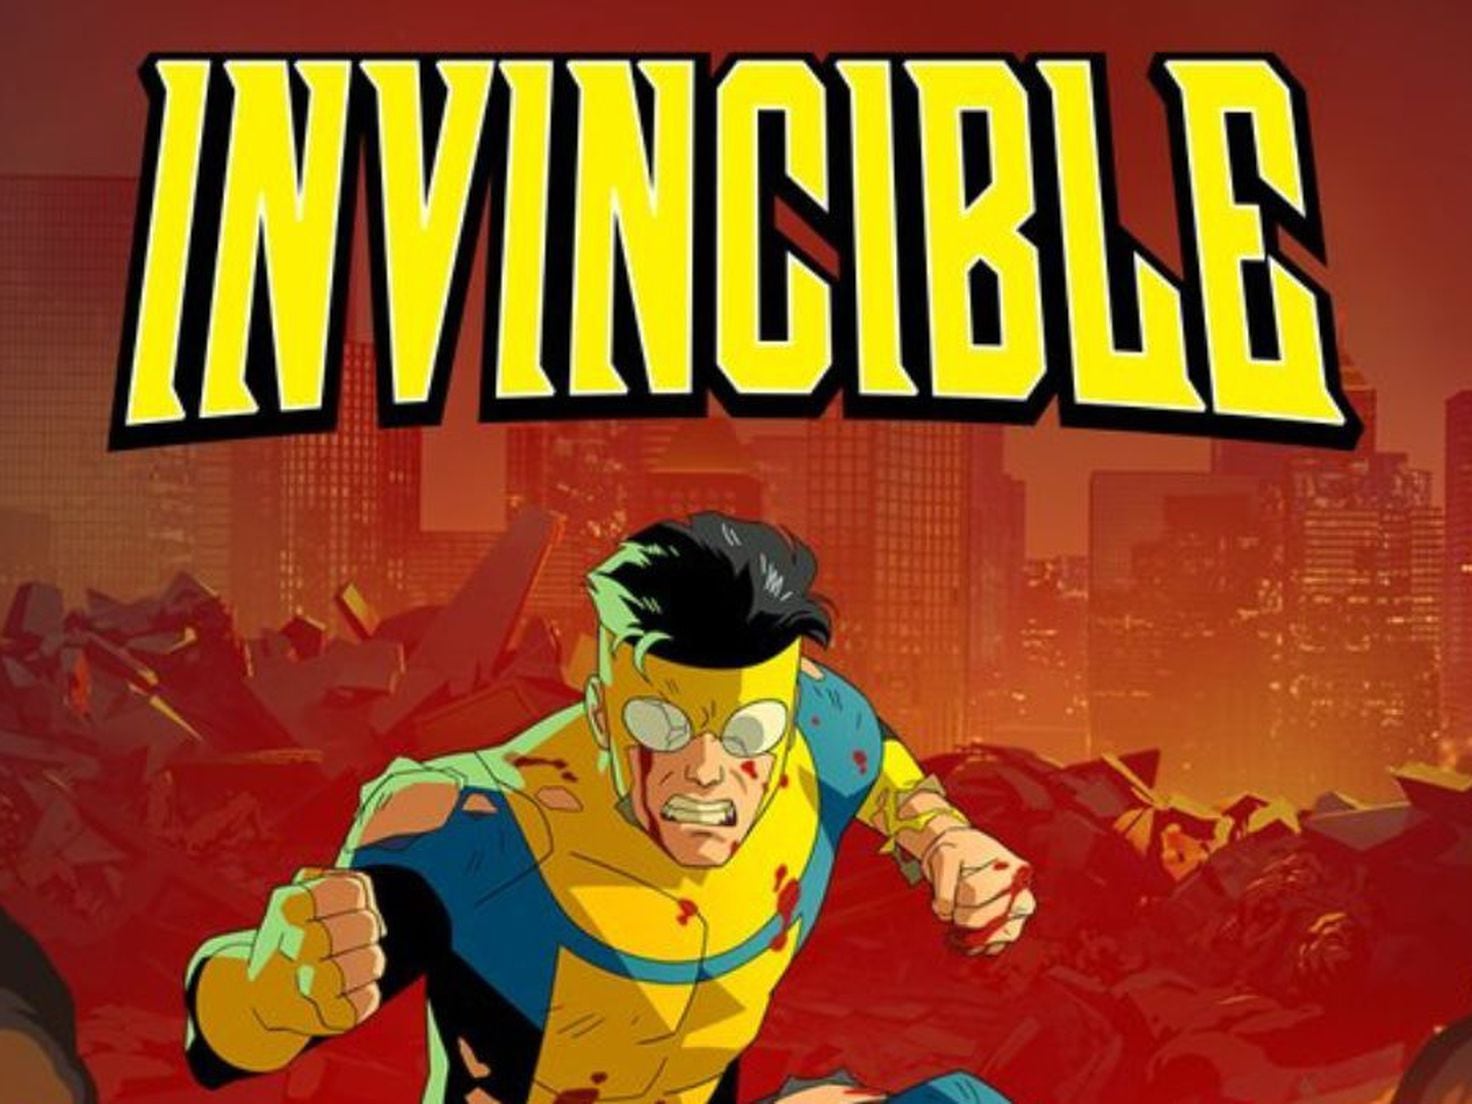 Prime Video - INVINCIBLE is back. Season 2 Episode 1 is now streaming.